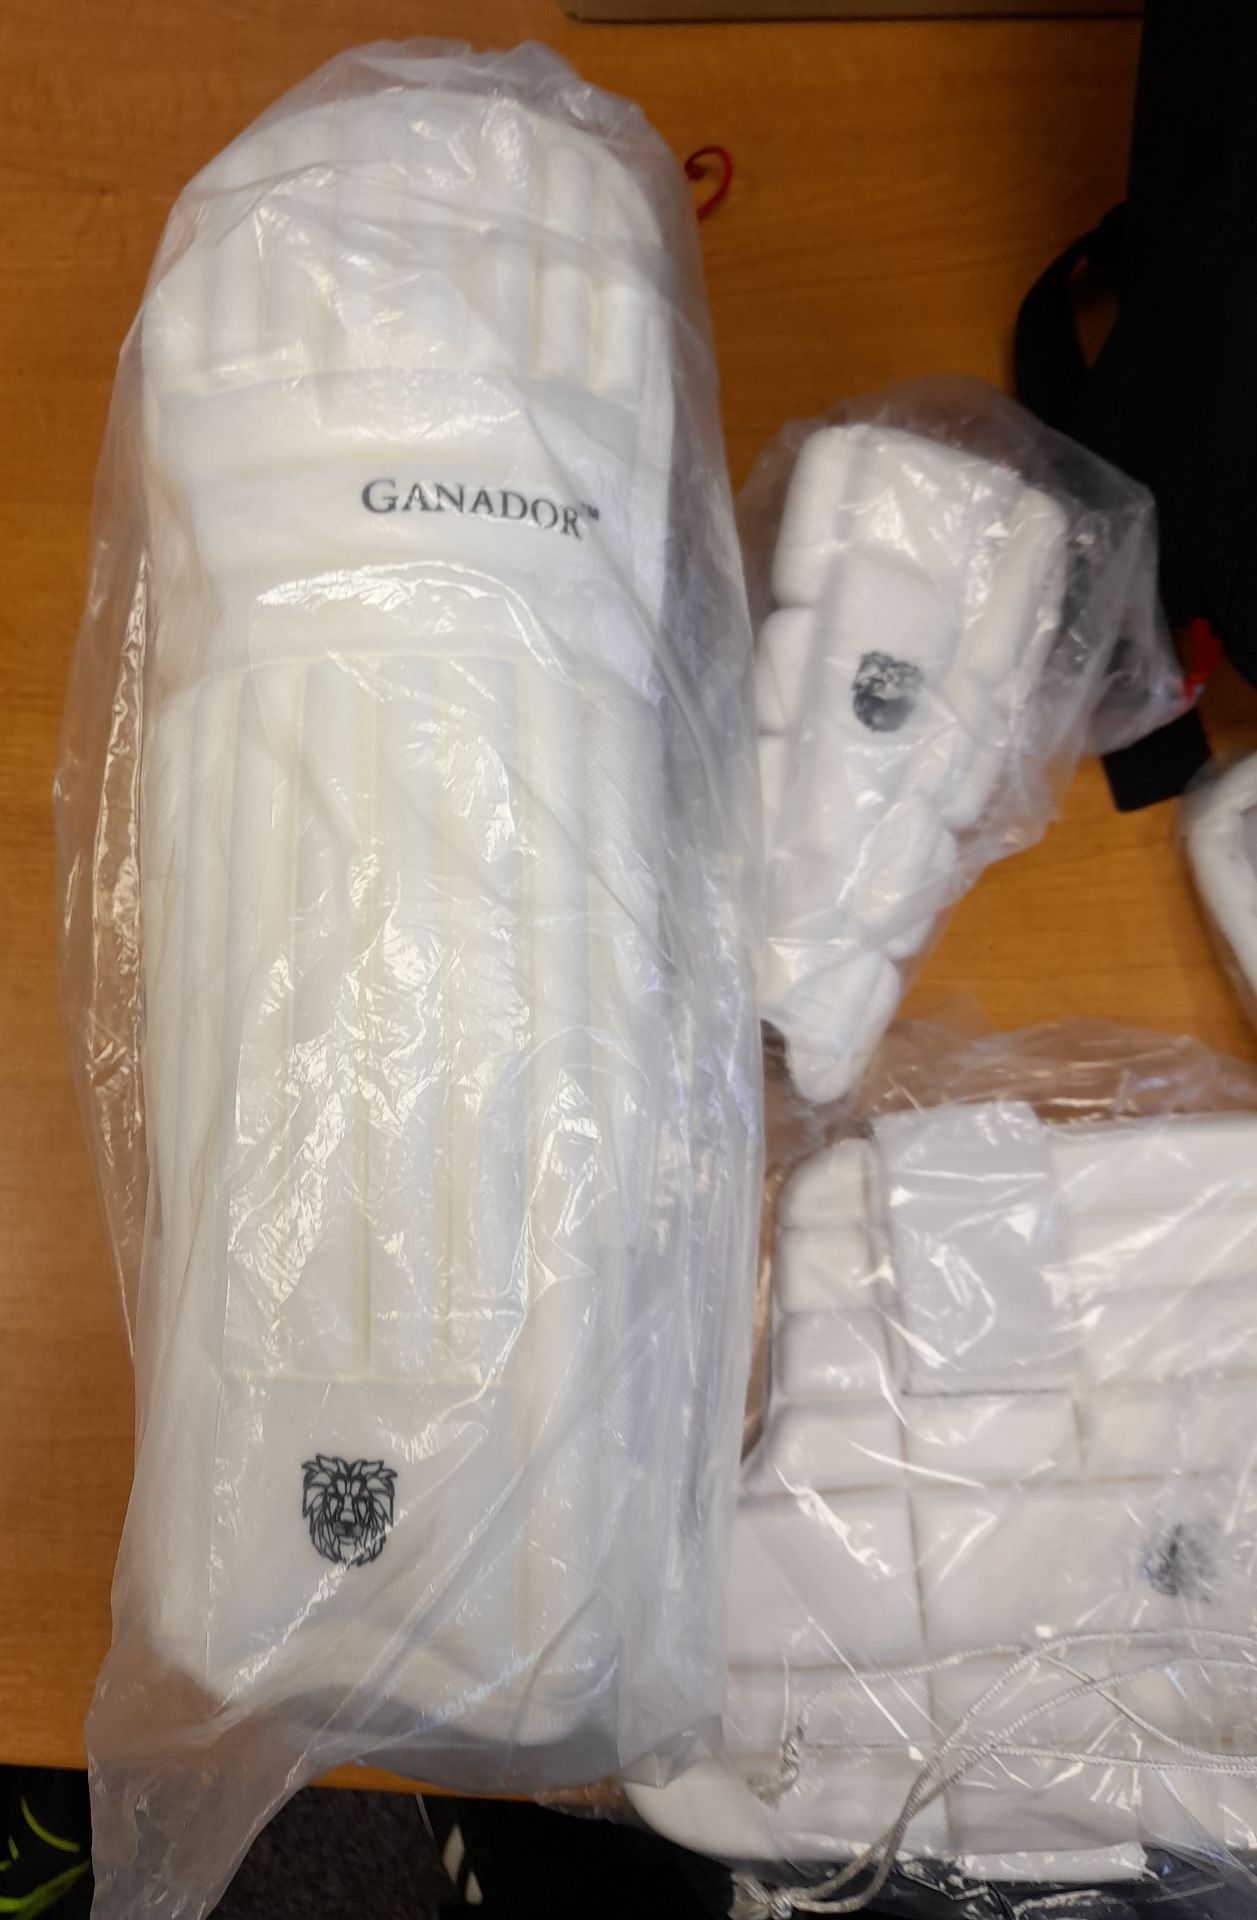 Ganador Childs Cricket Protection Kit to include Batting Pads, Forearm Protector, Box etc. to hold - Image 5 of 5